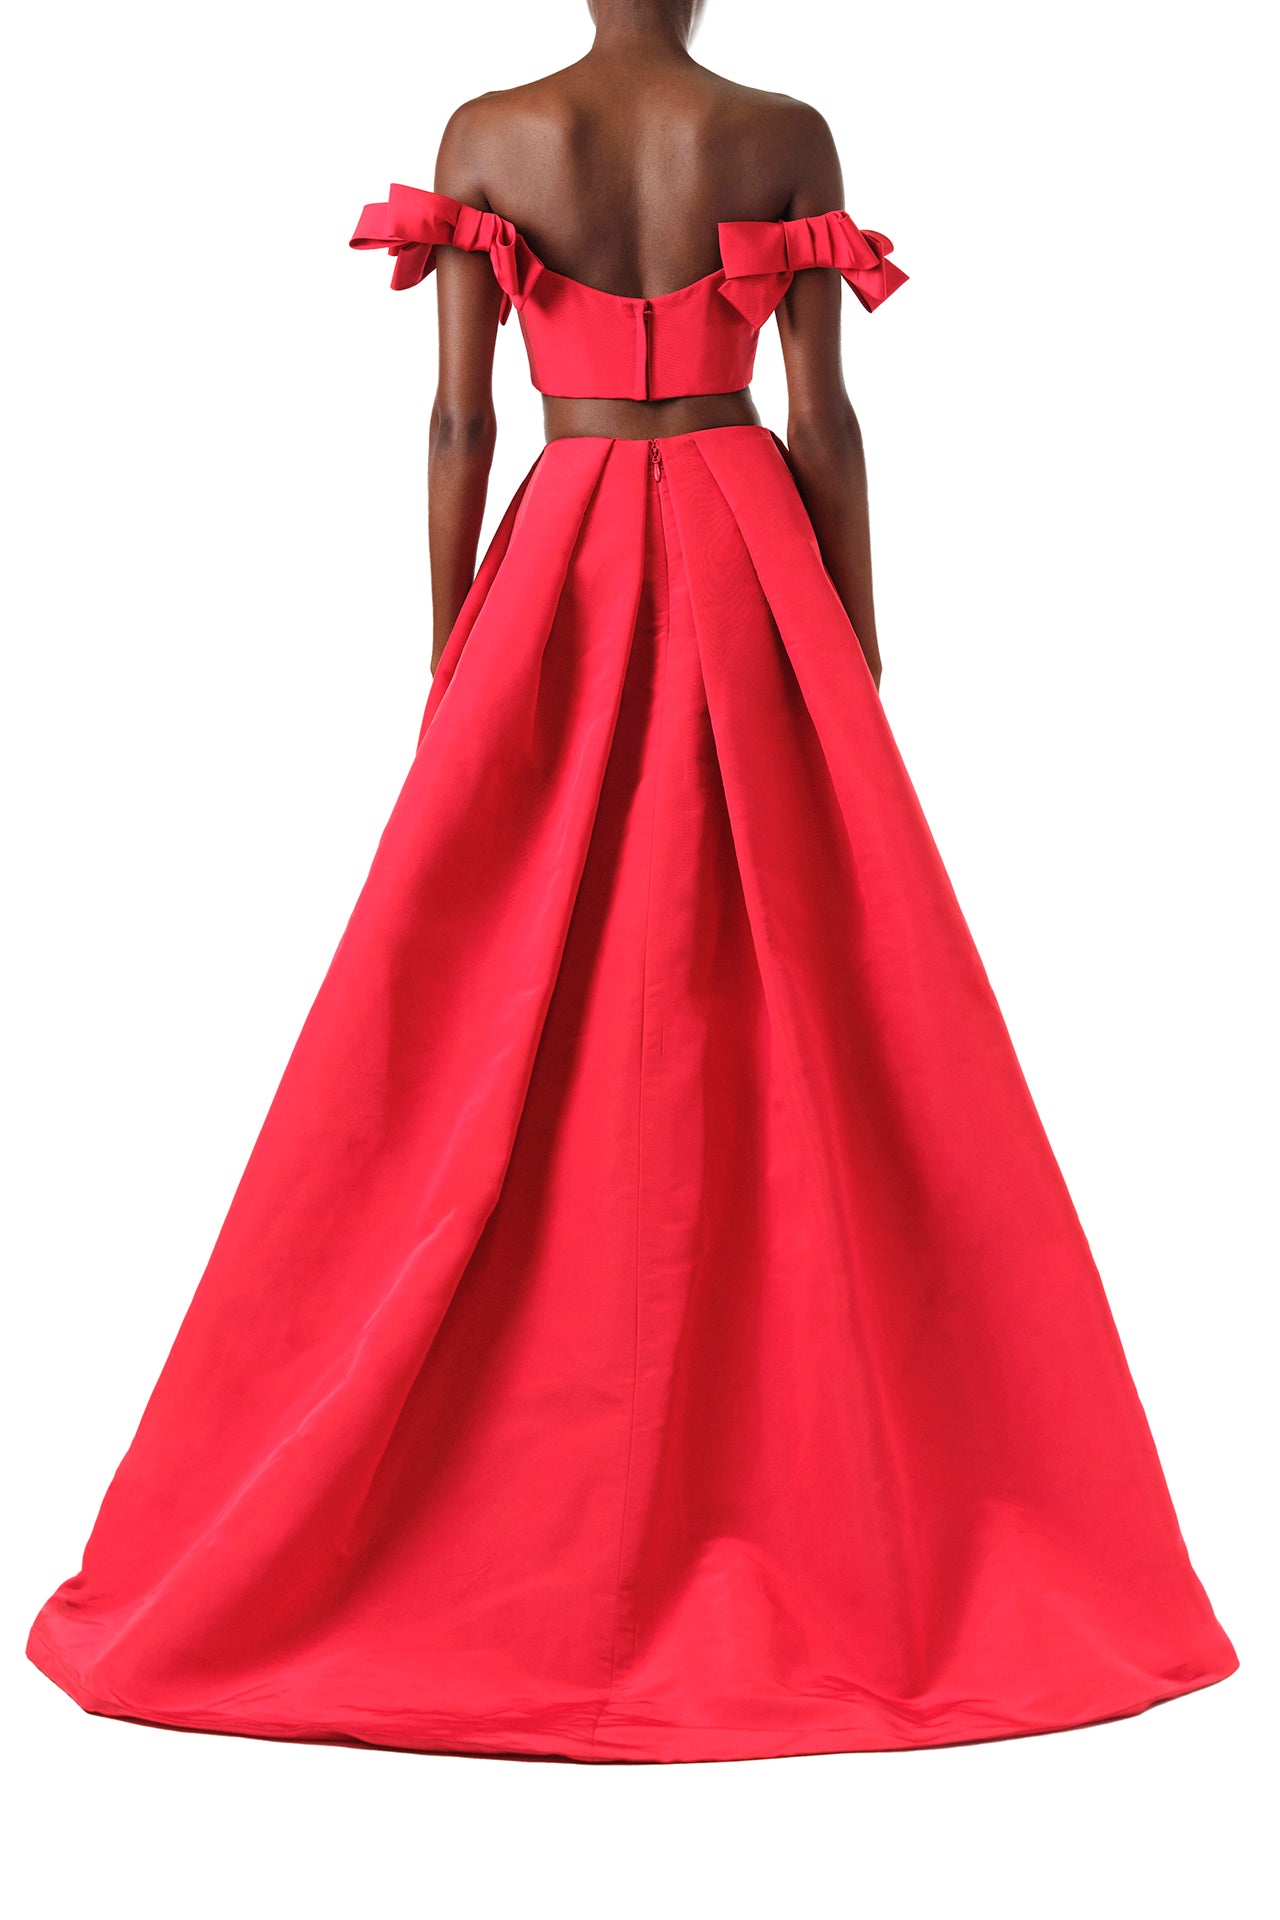 Monique Lhuillier Fall 2024 scarlet red faille pleated ballgown skirt with high front slit and pockets - back.